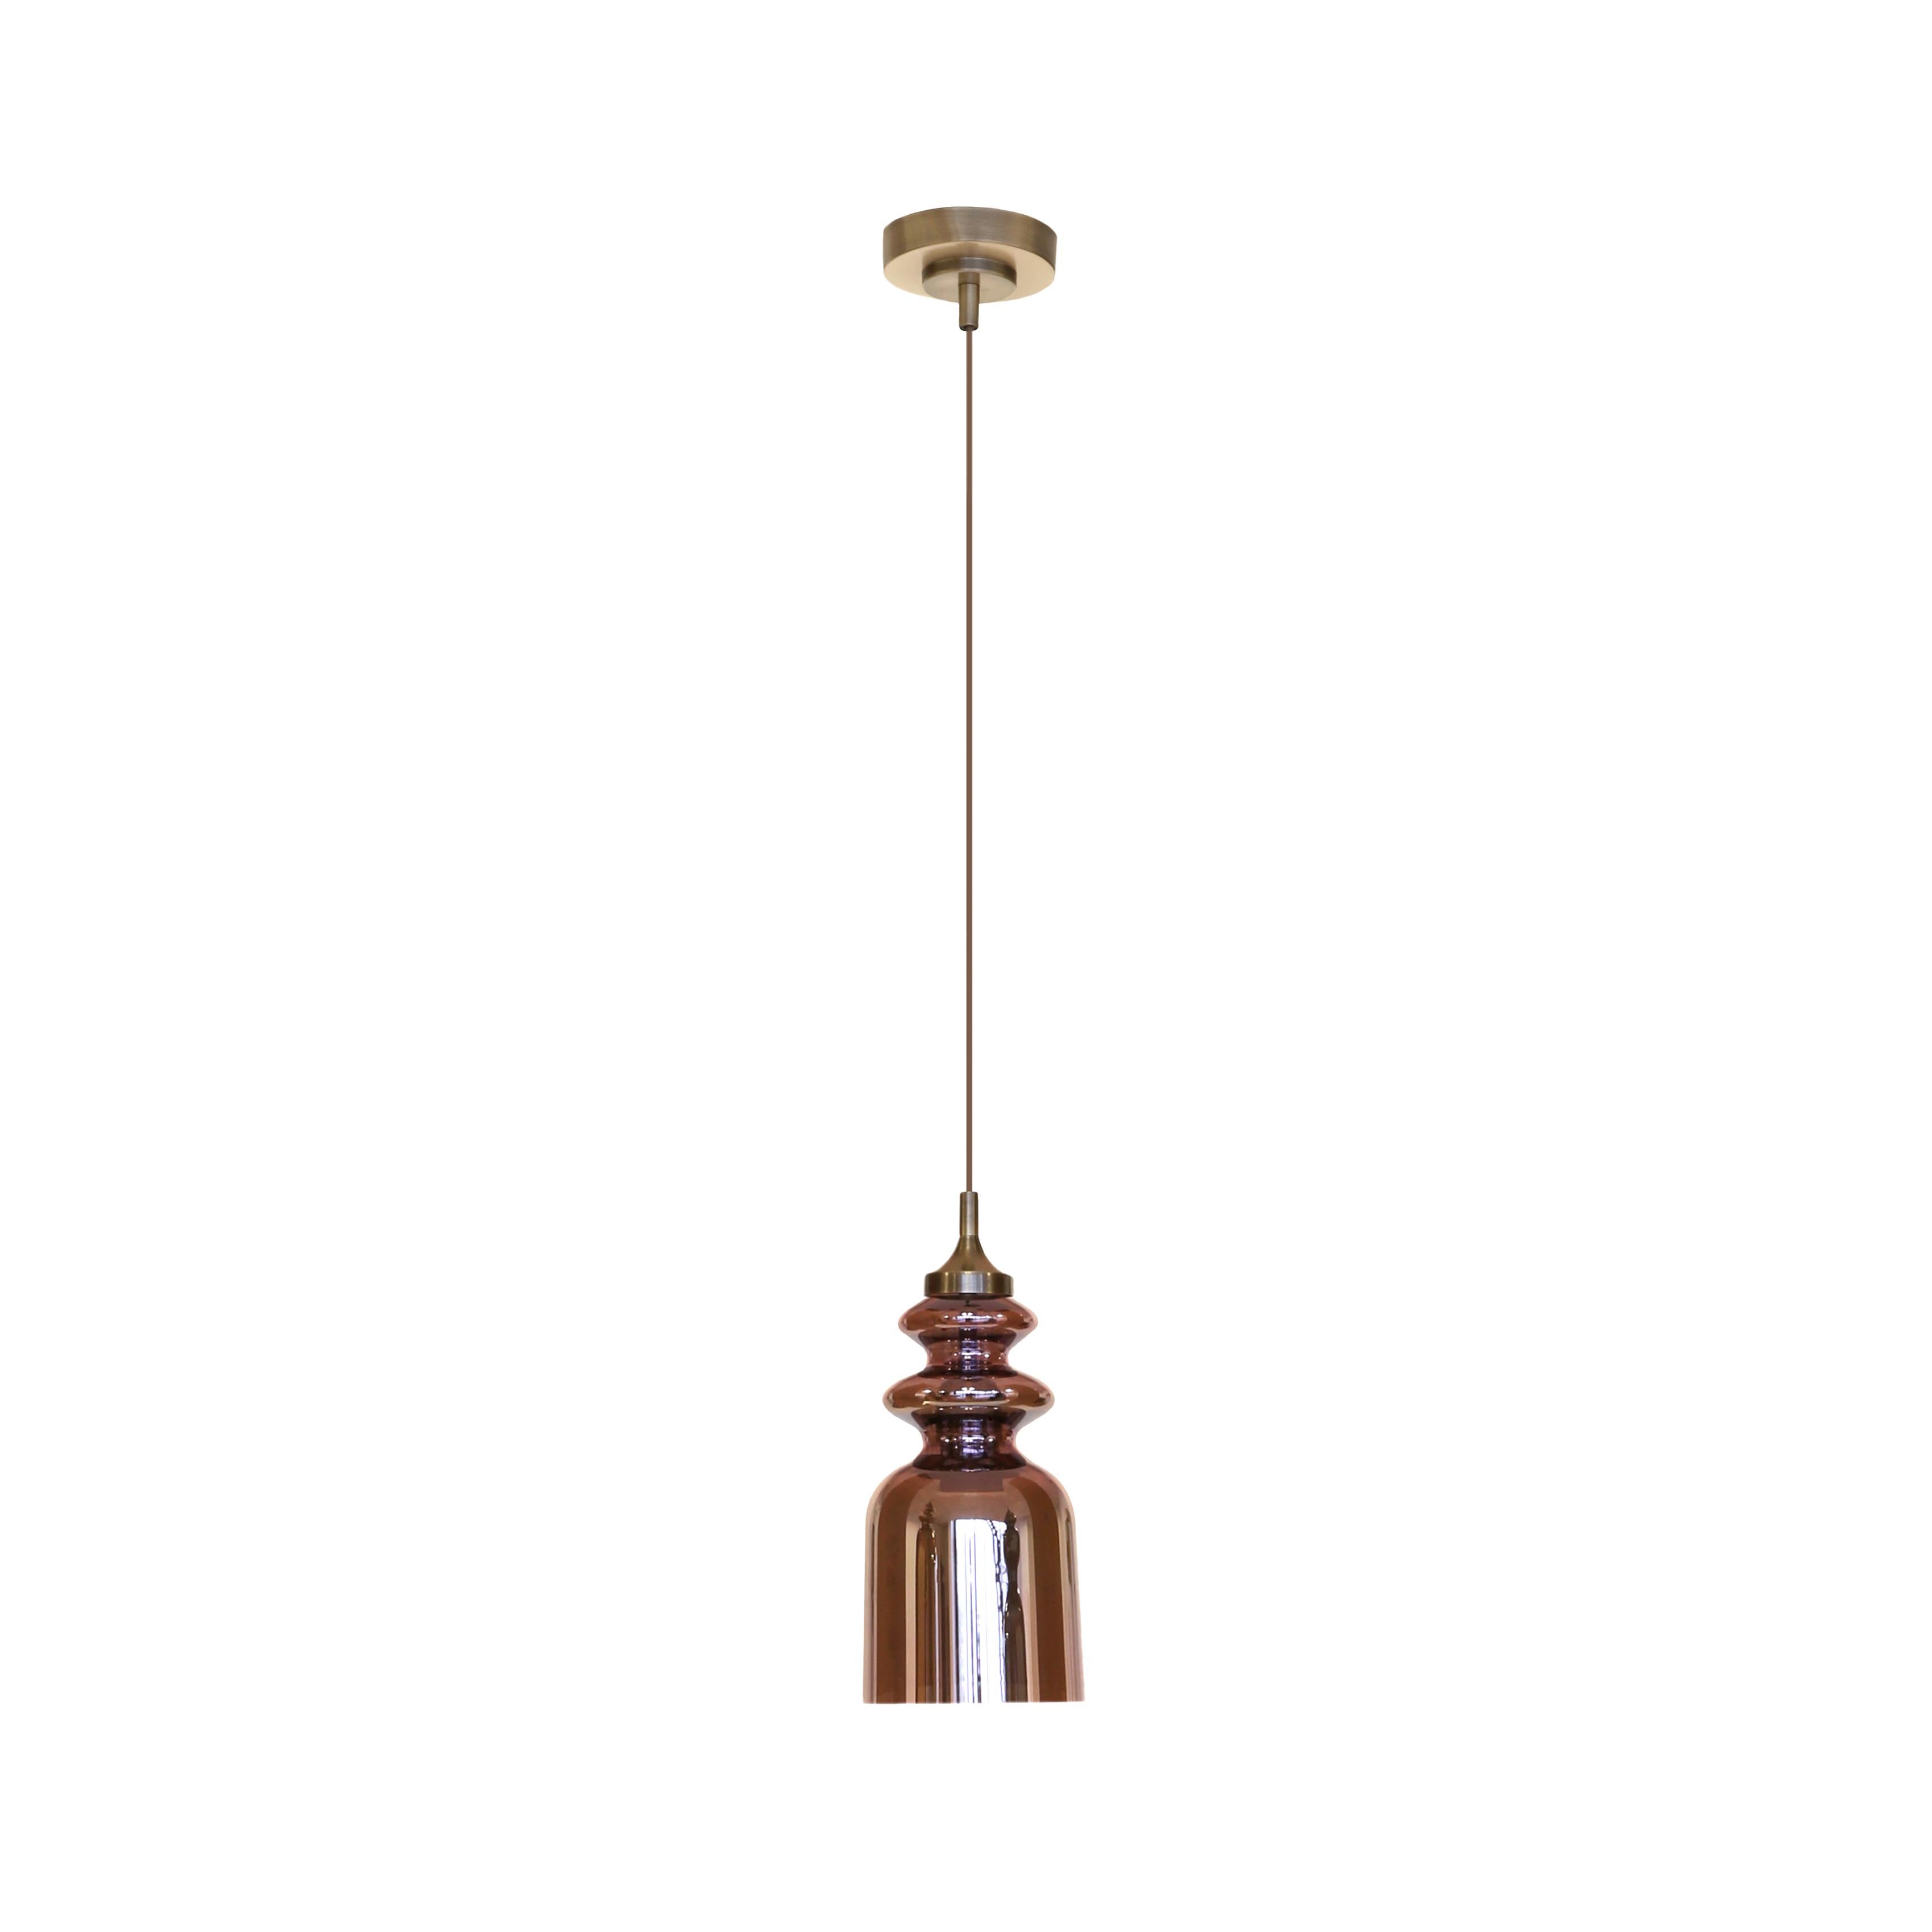 Messalina Suspension Light with Satin Bronze Structure and Antique Pink